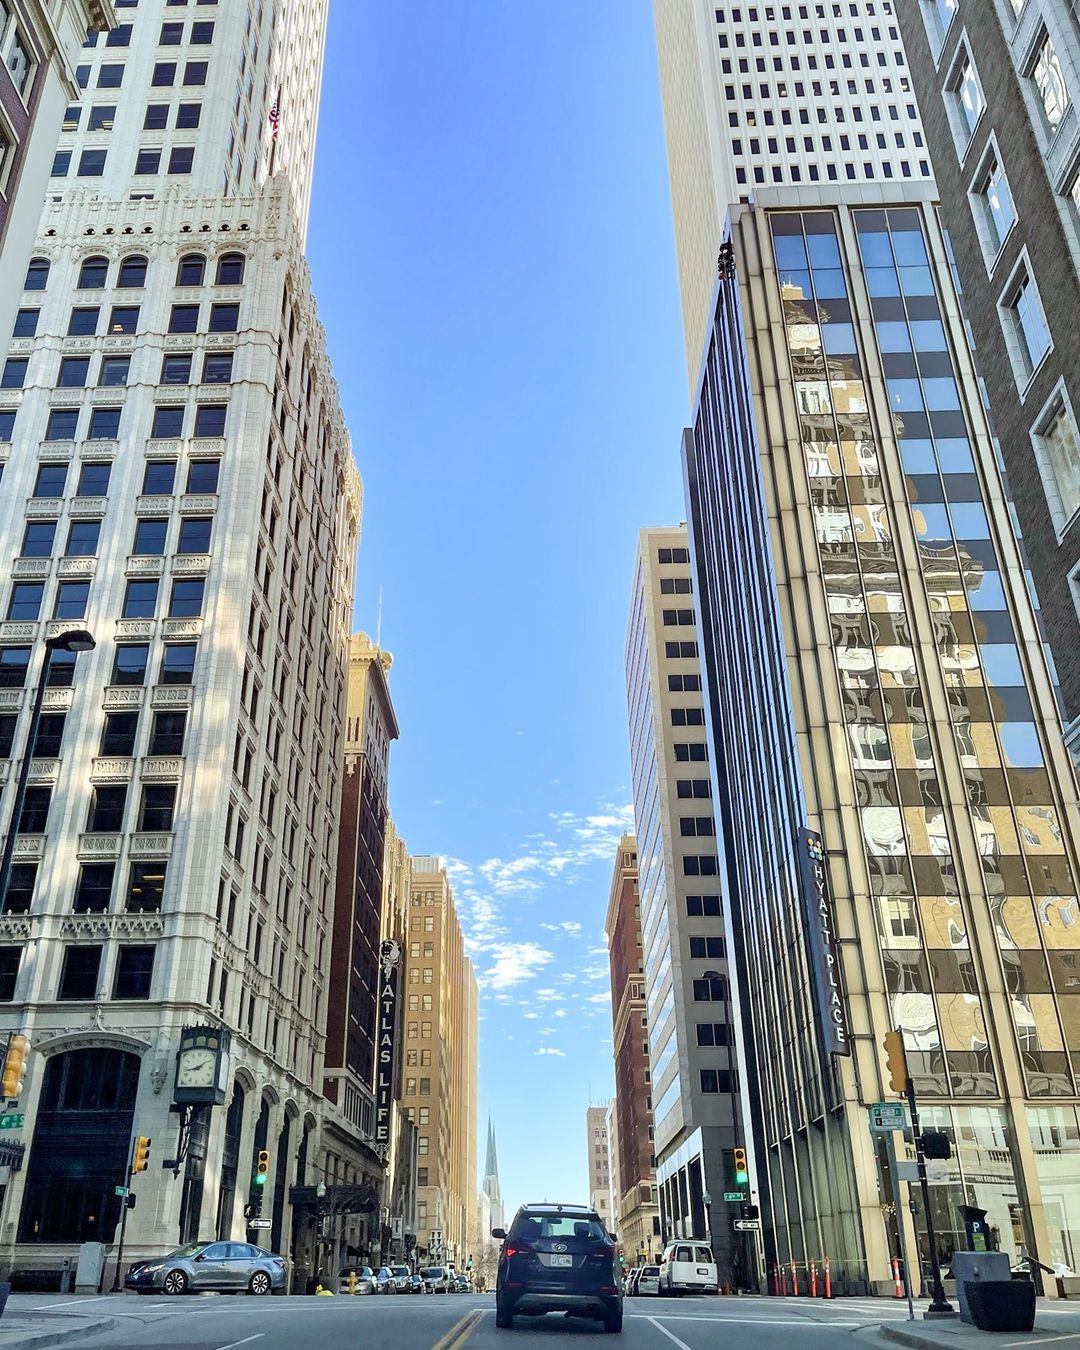 Street View of the Tall Buildings in Downtown Tulsa. Photo by Instagram user @pfptulsa